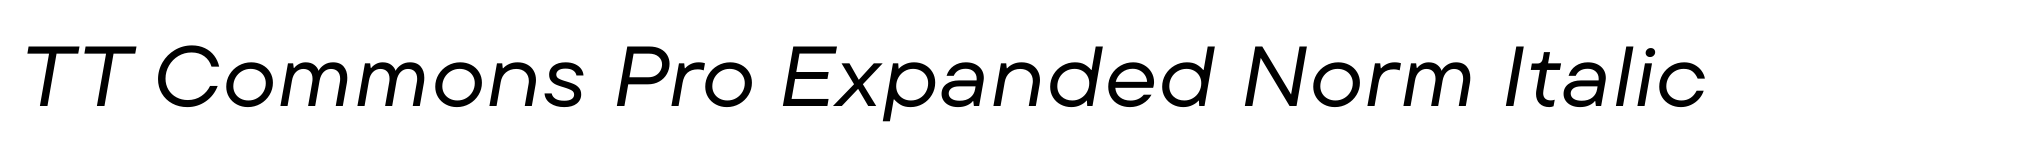 TT Commons Pro Expanded Norm Italic image